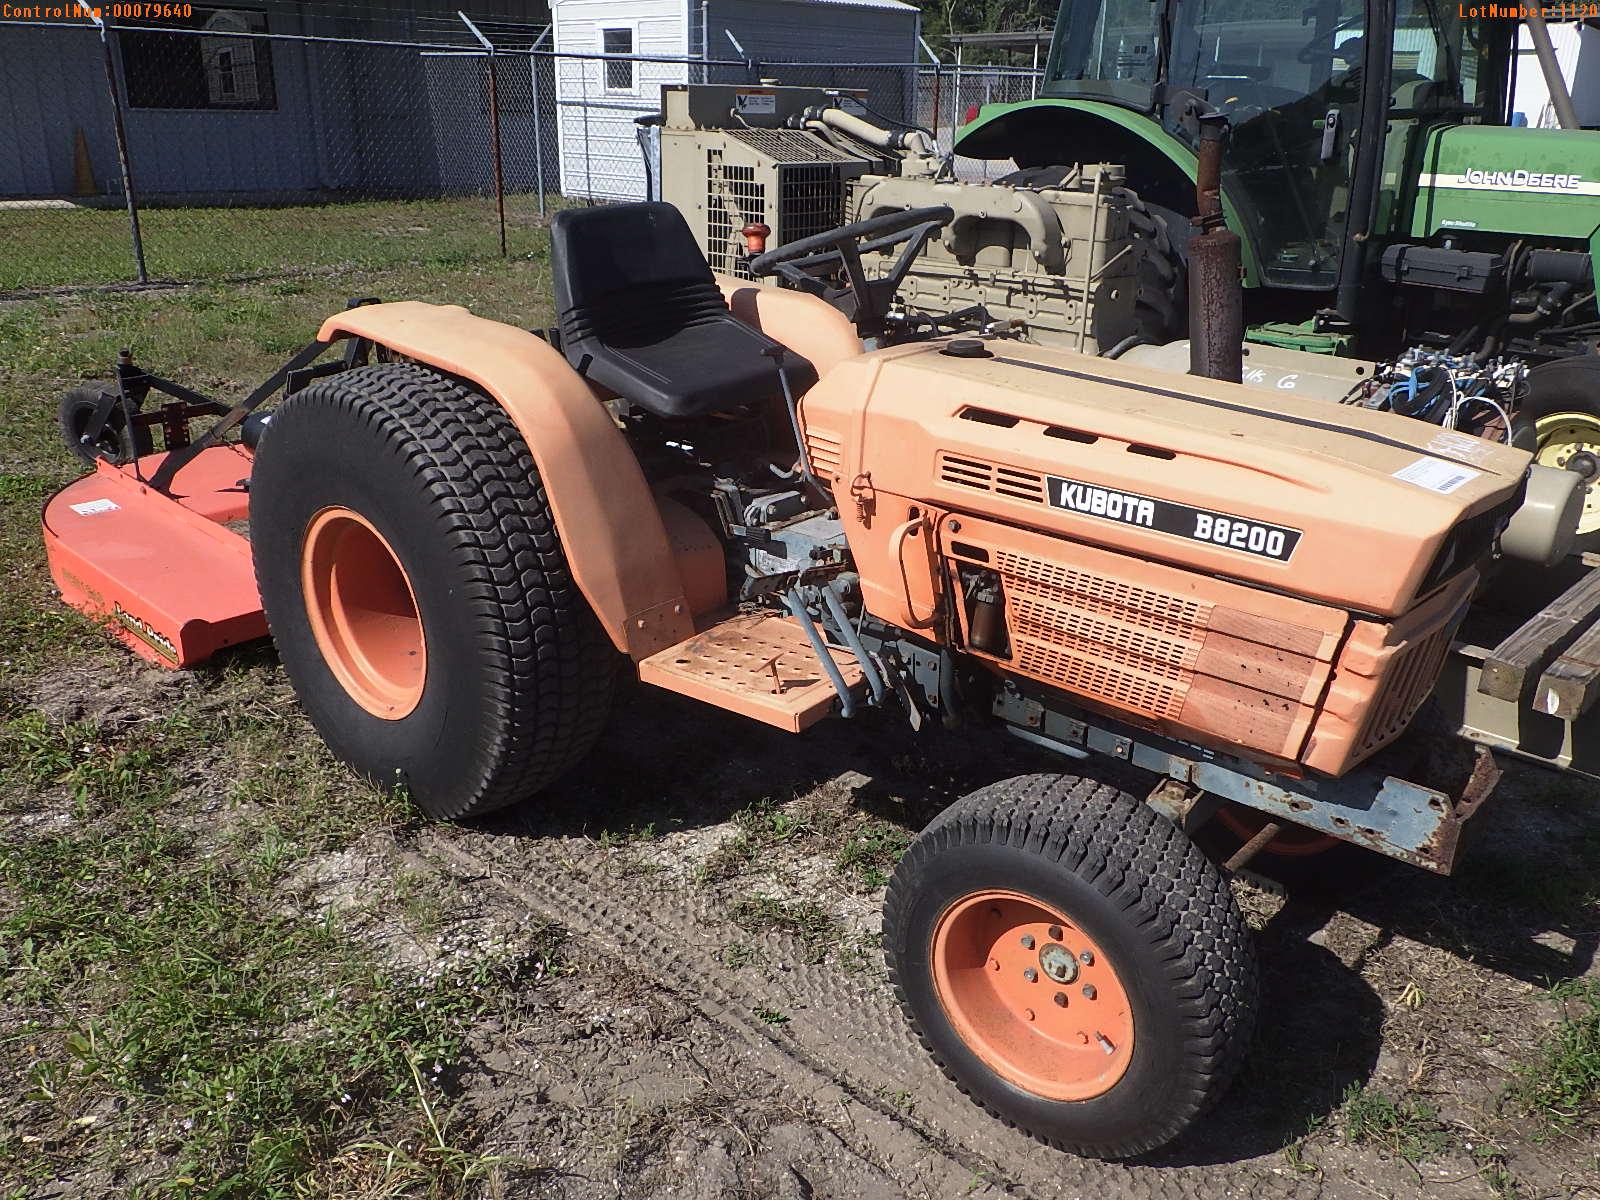 5-01120 (Equip.-Tractor)  Seller:Private/Dealer KUBOTA B8200 TRACTOR WITH LANDPR